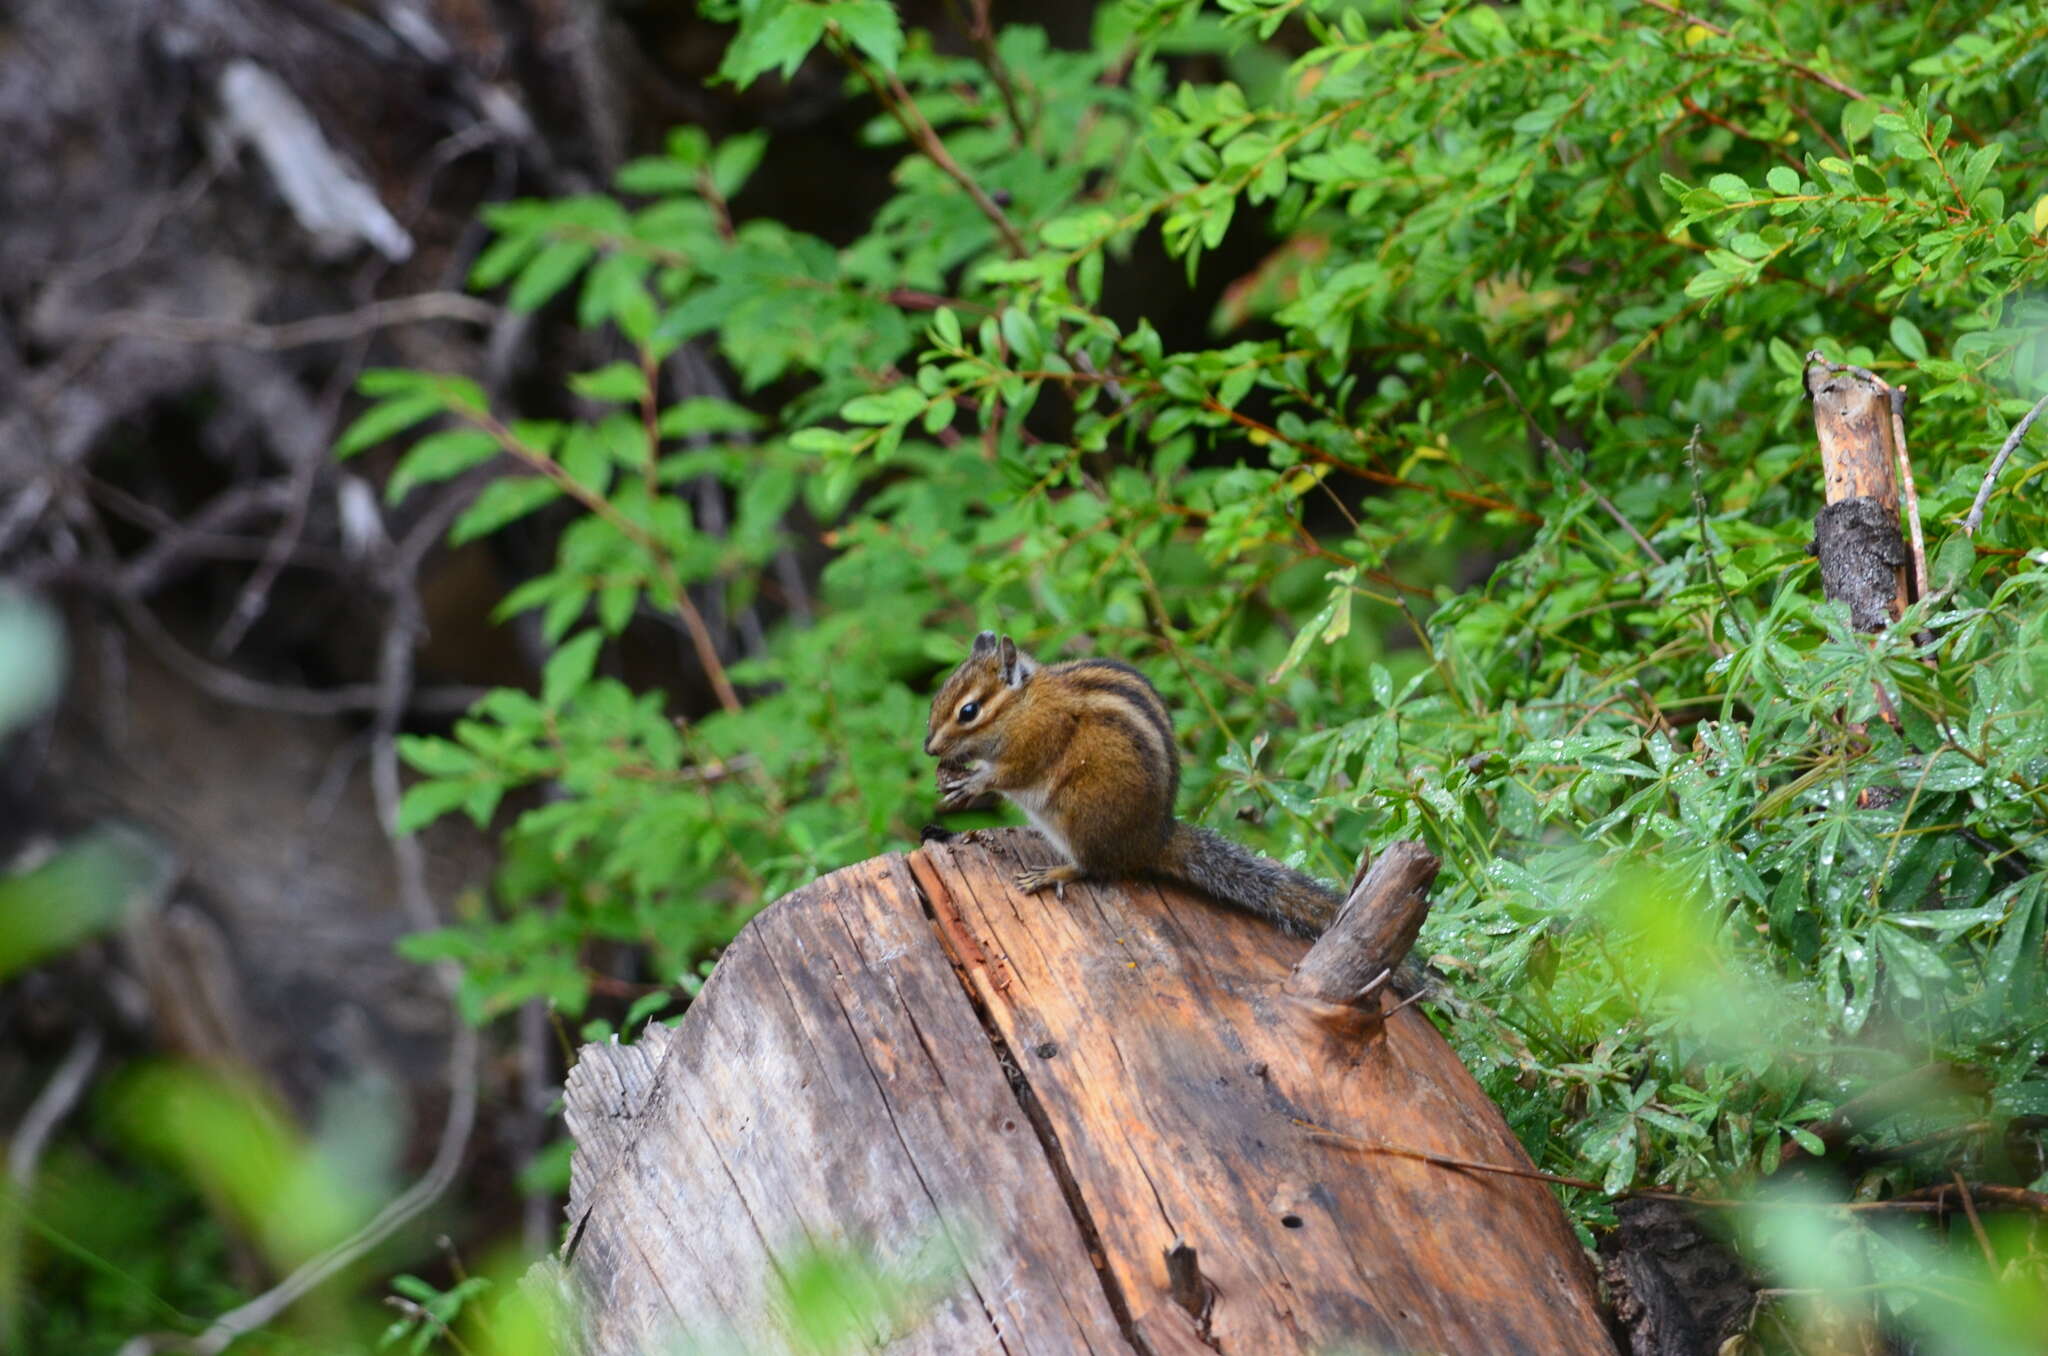 Image of Townsend’s Chipmunk